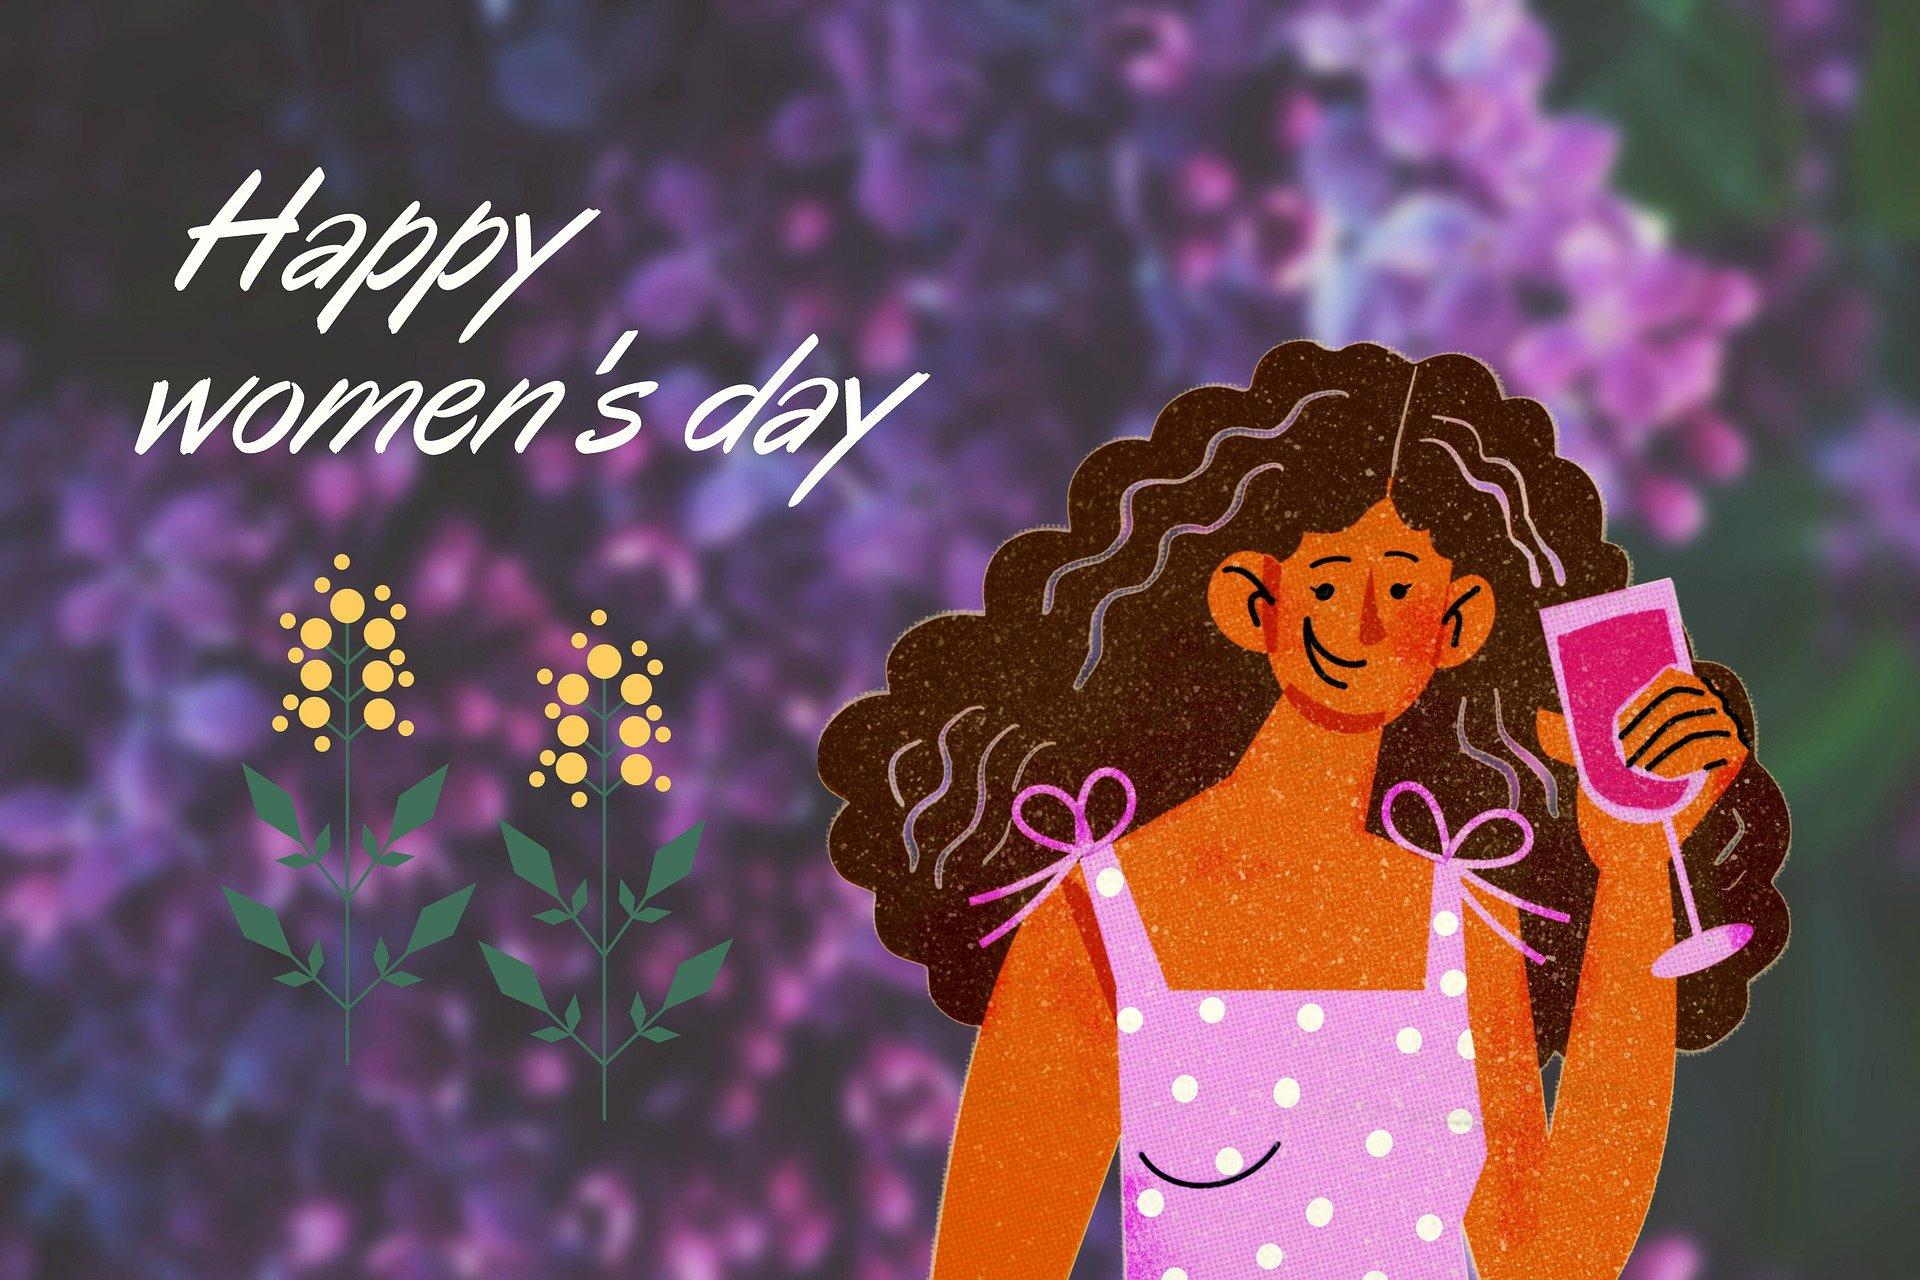 Women's Day 2022: Wishes, Messages, Quotes, WhatsApp Status, Image to share